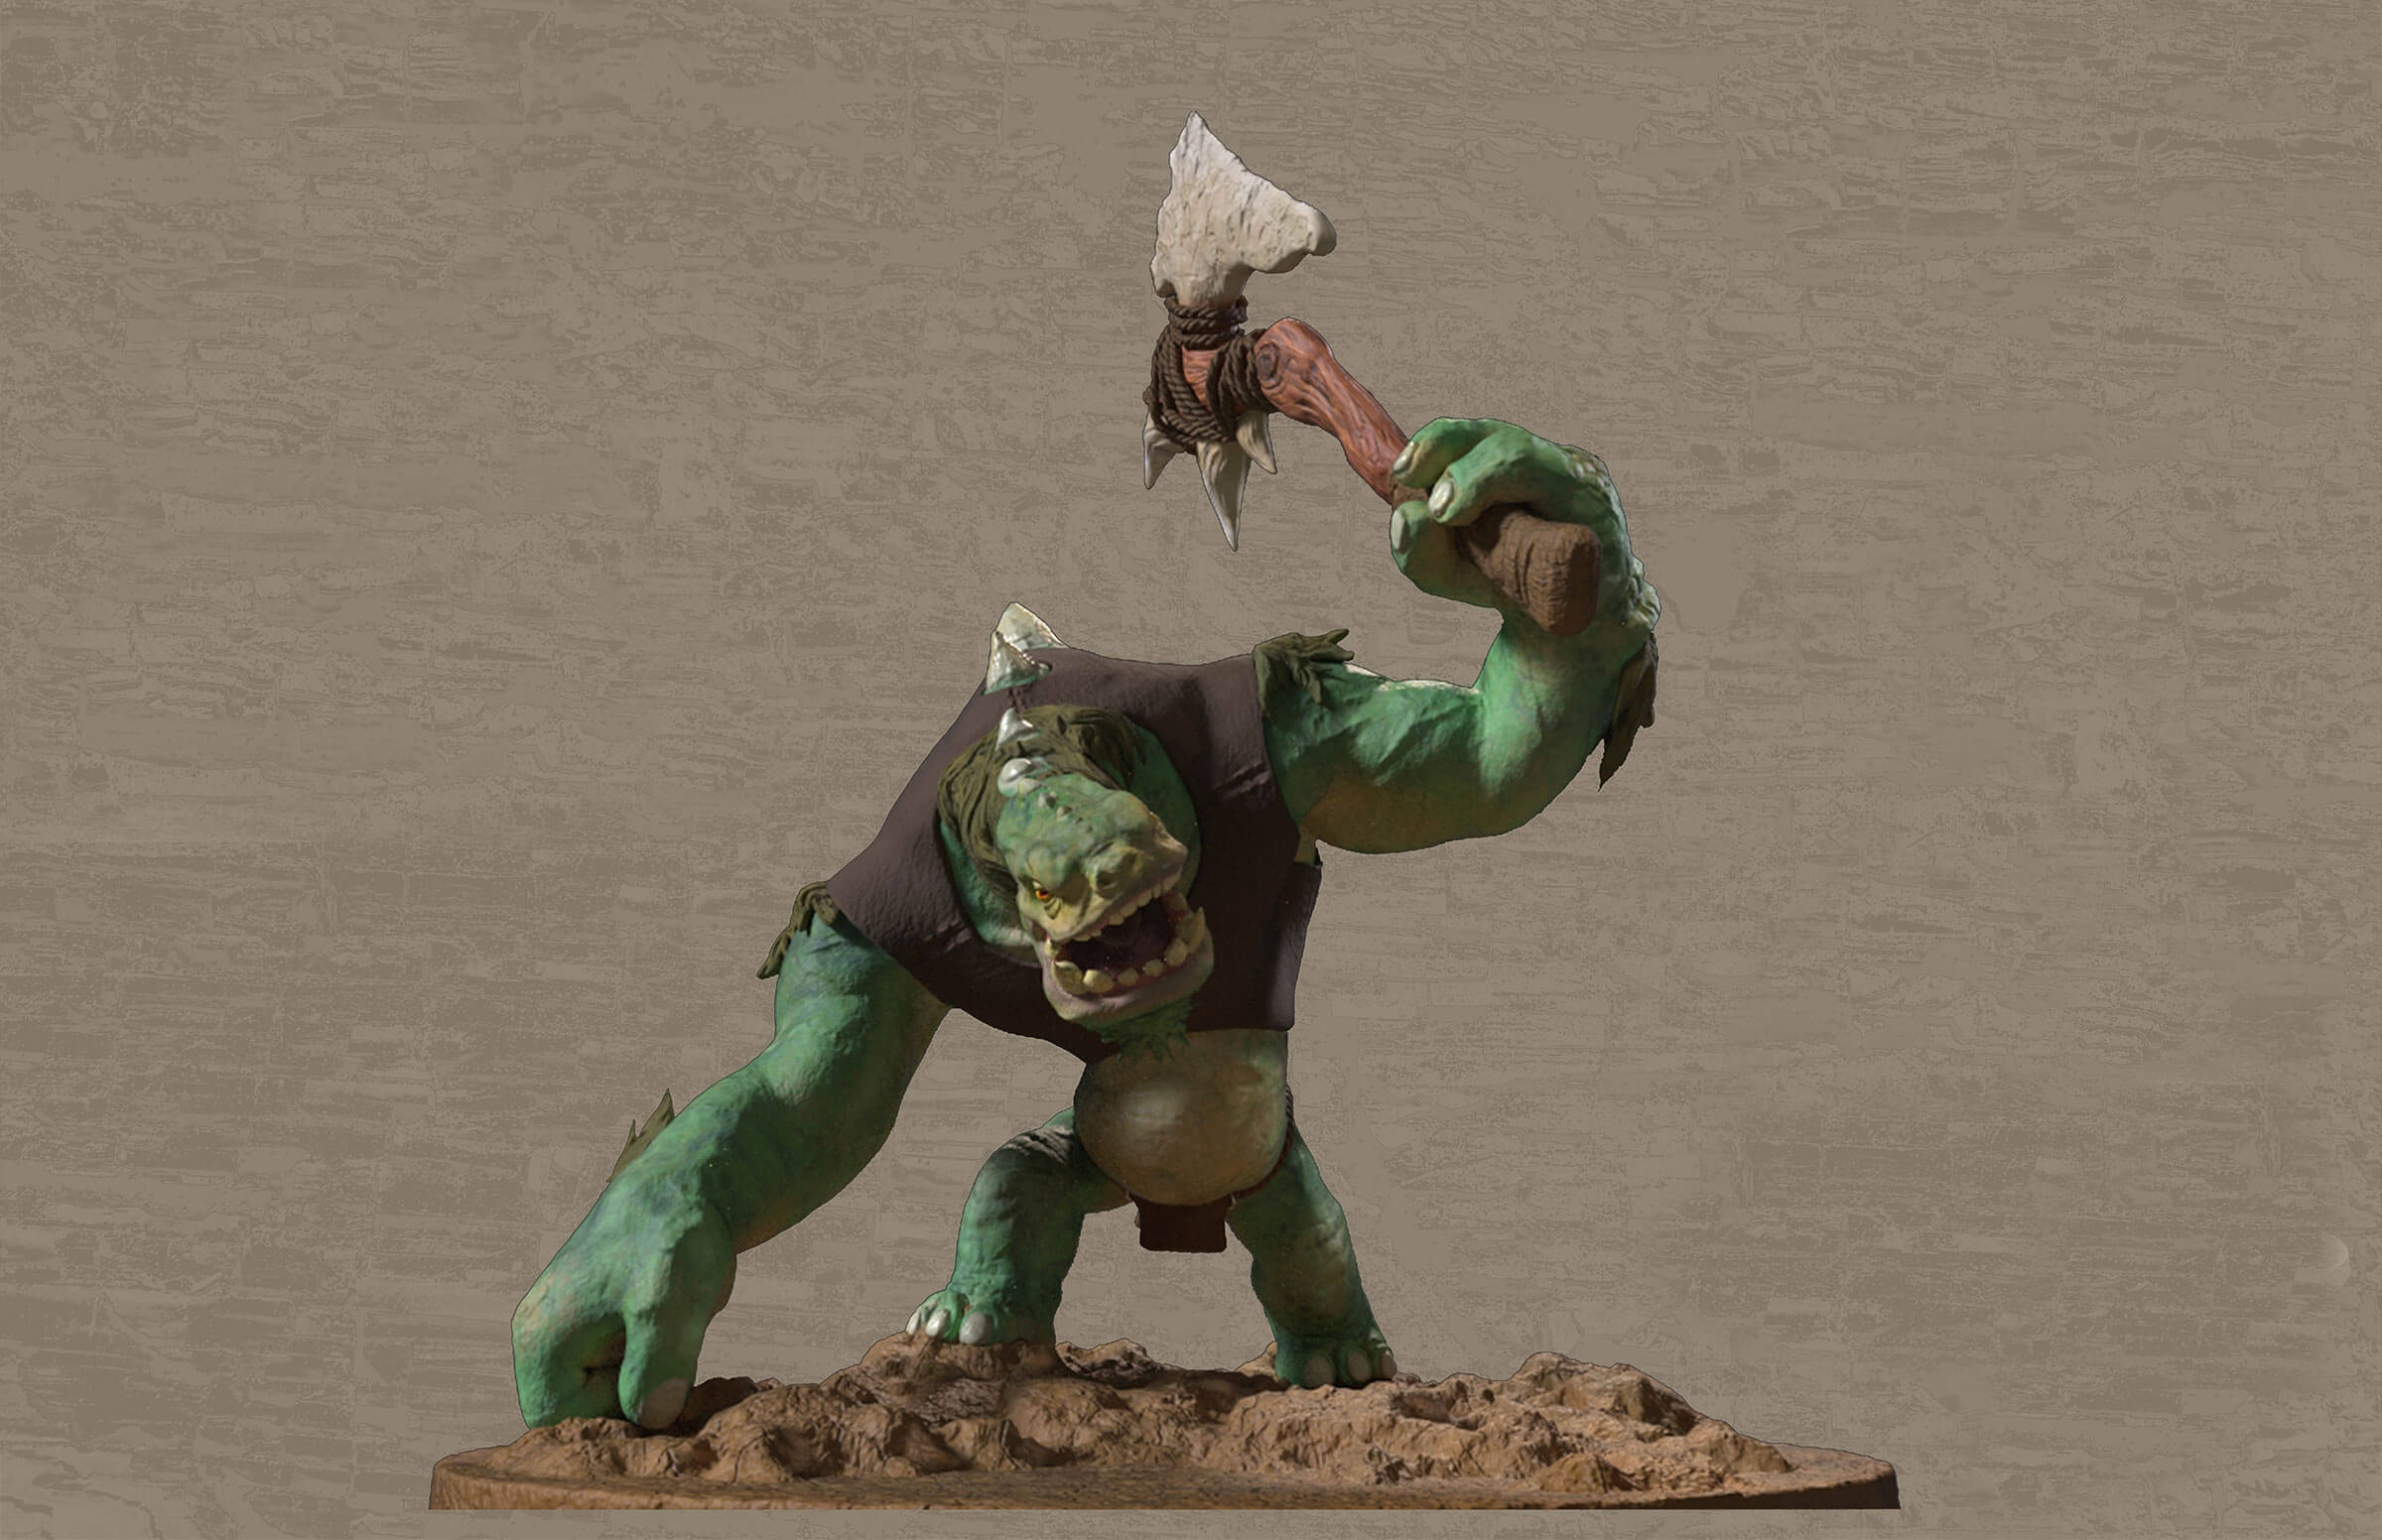 A green troll-like creature wearing a brown tunic raises a crude, wood and stone ax above its head.